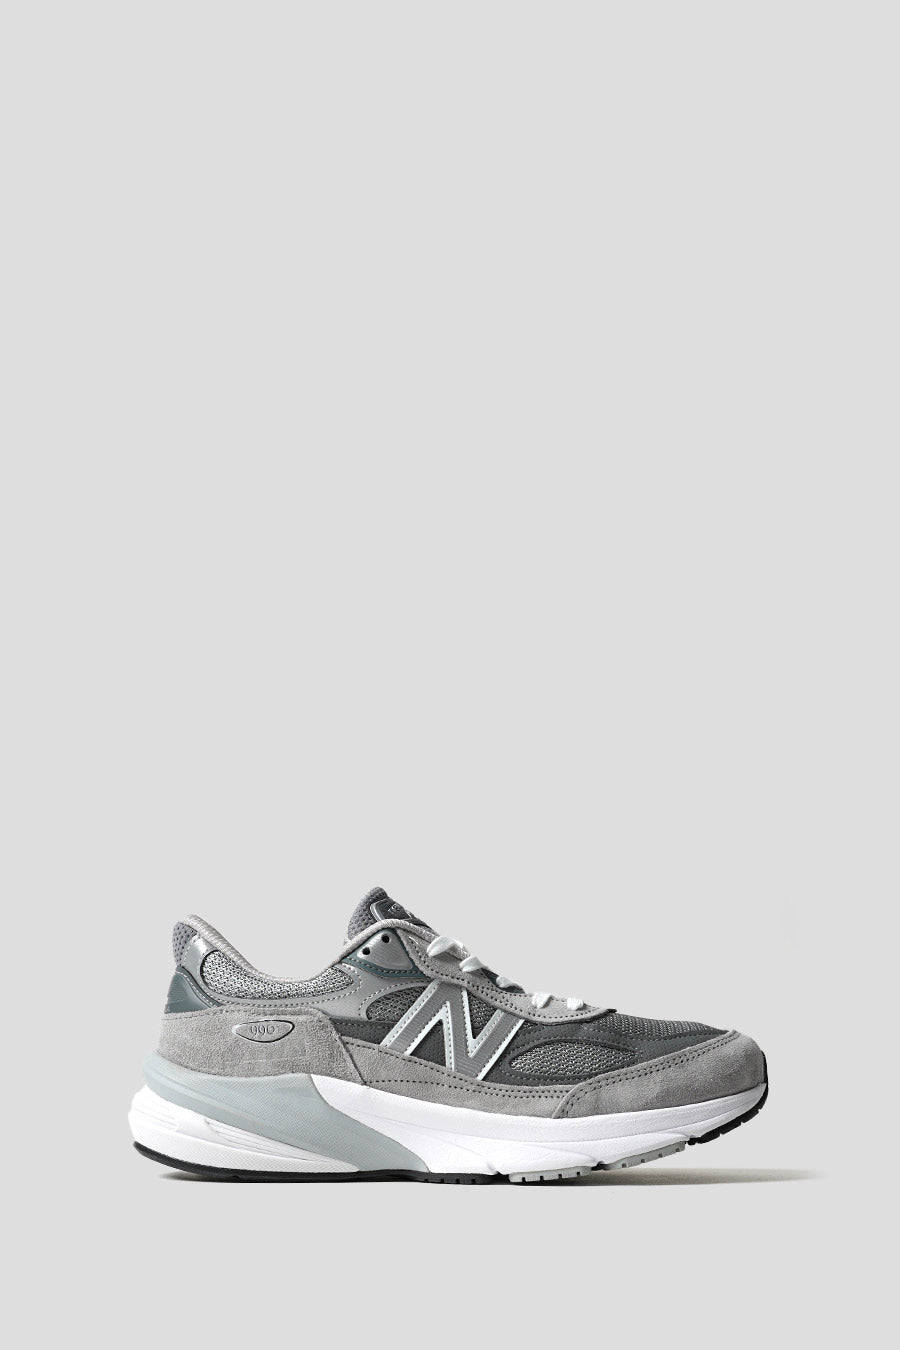 NEW BALANCE - SNEAKERS MADE IN USA M990V6 GRISES - LE LABO STORE